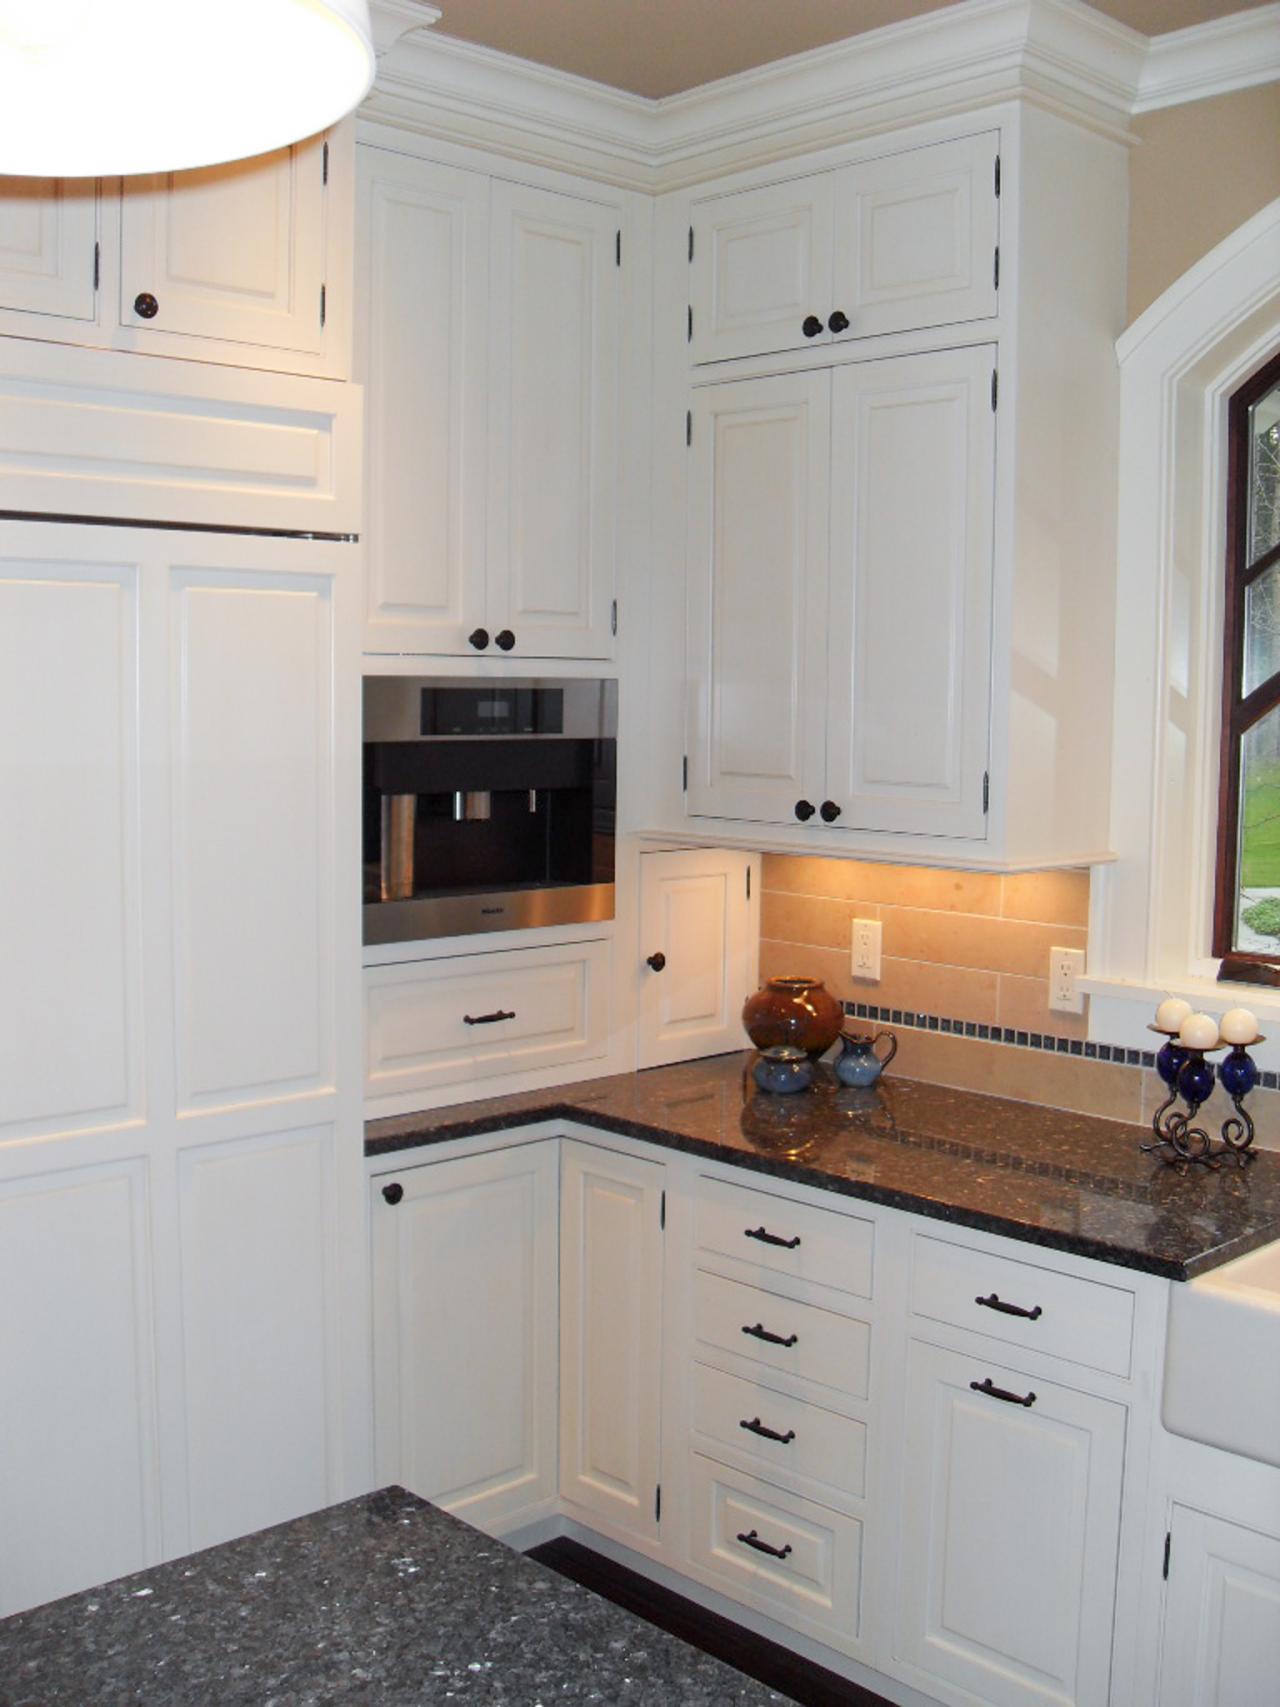 Refinishing Kitchen Cabinet Ideas Pictures Tips From HGTV HGTV